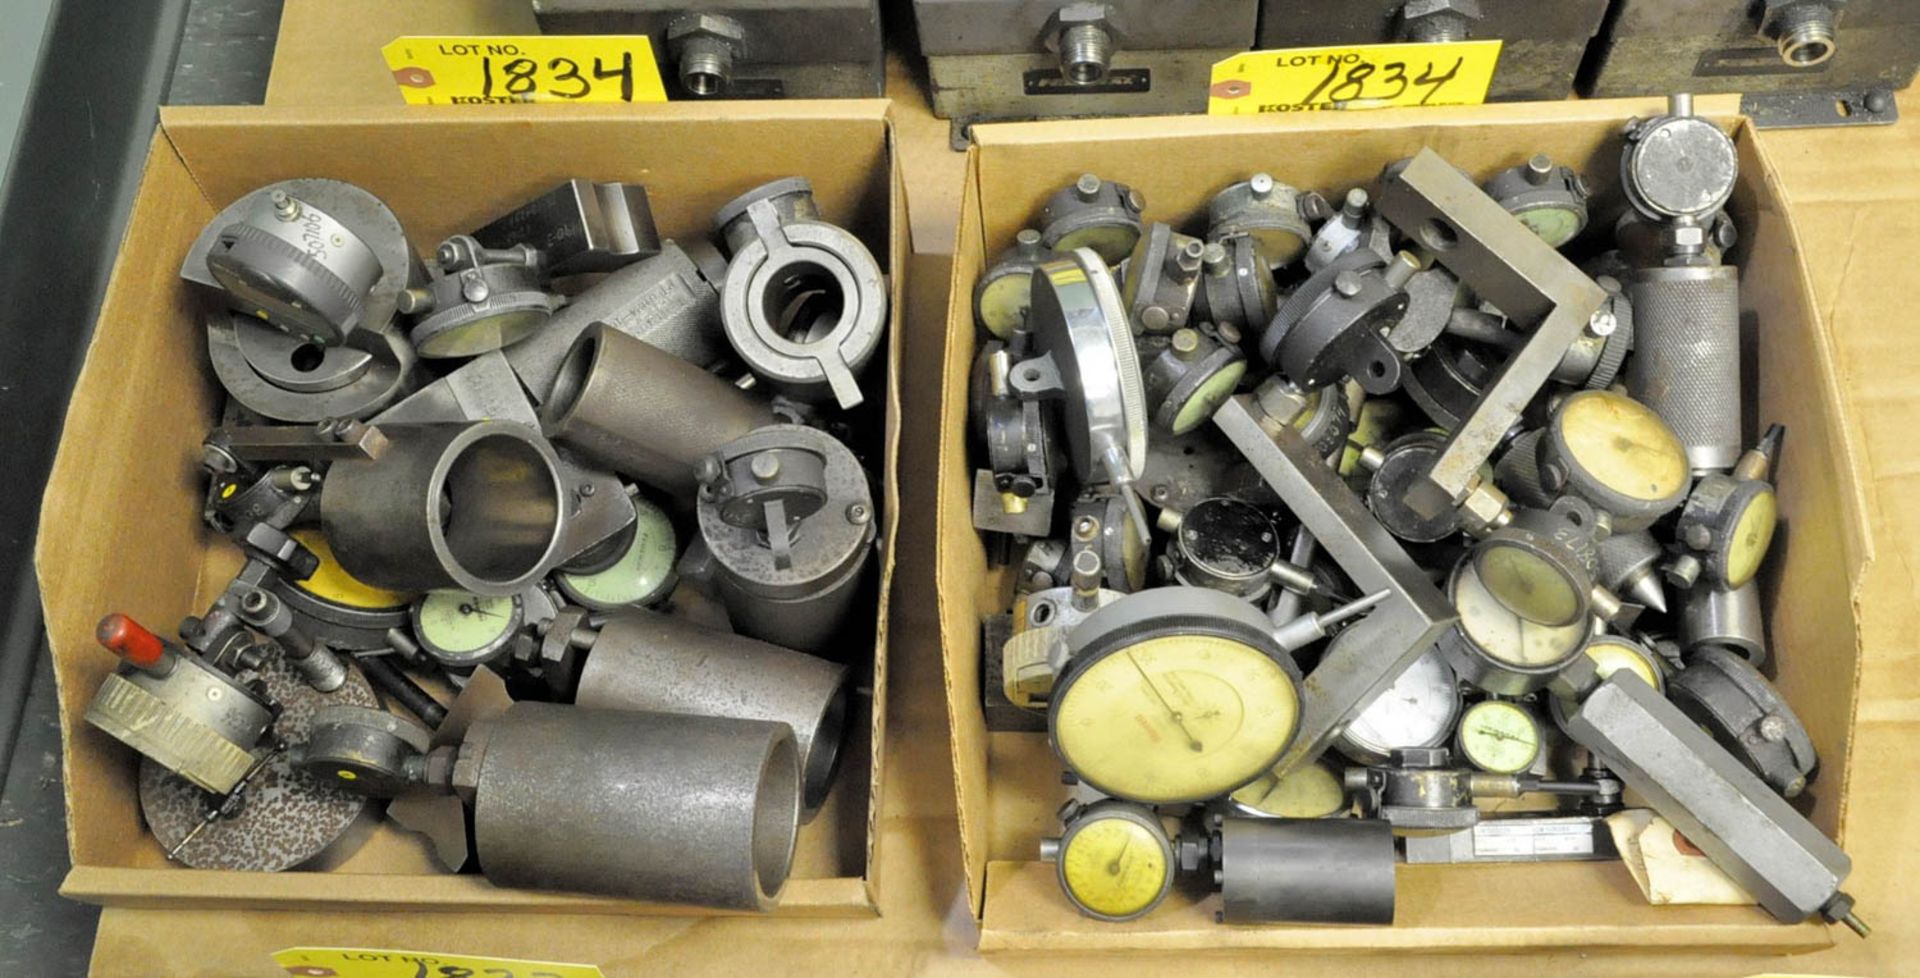 VARIOUS DIAL FORCE INDICATORS & FIXTURE TOOLING IN (2) BOXES, (TOOL ROOM-TIFFIN)